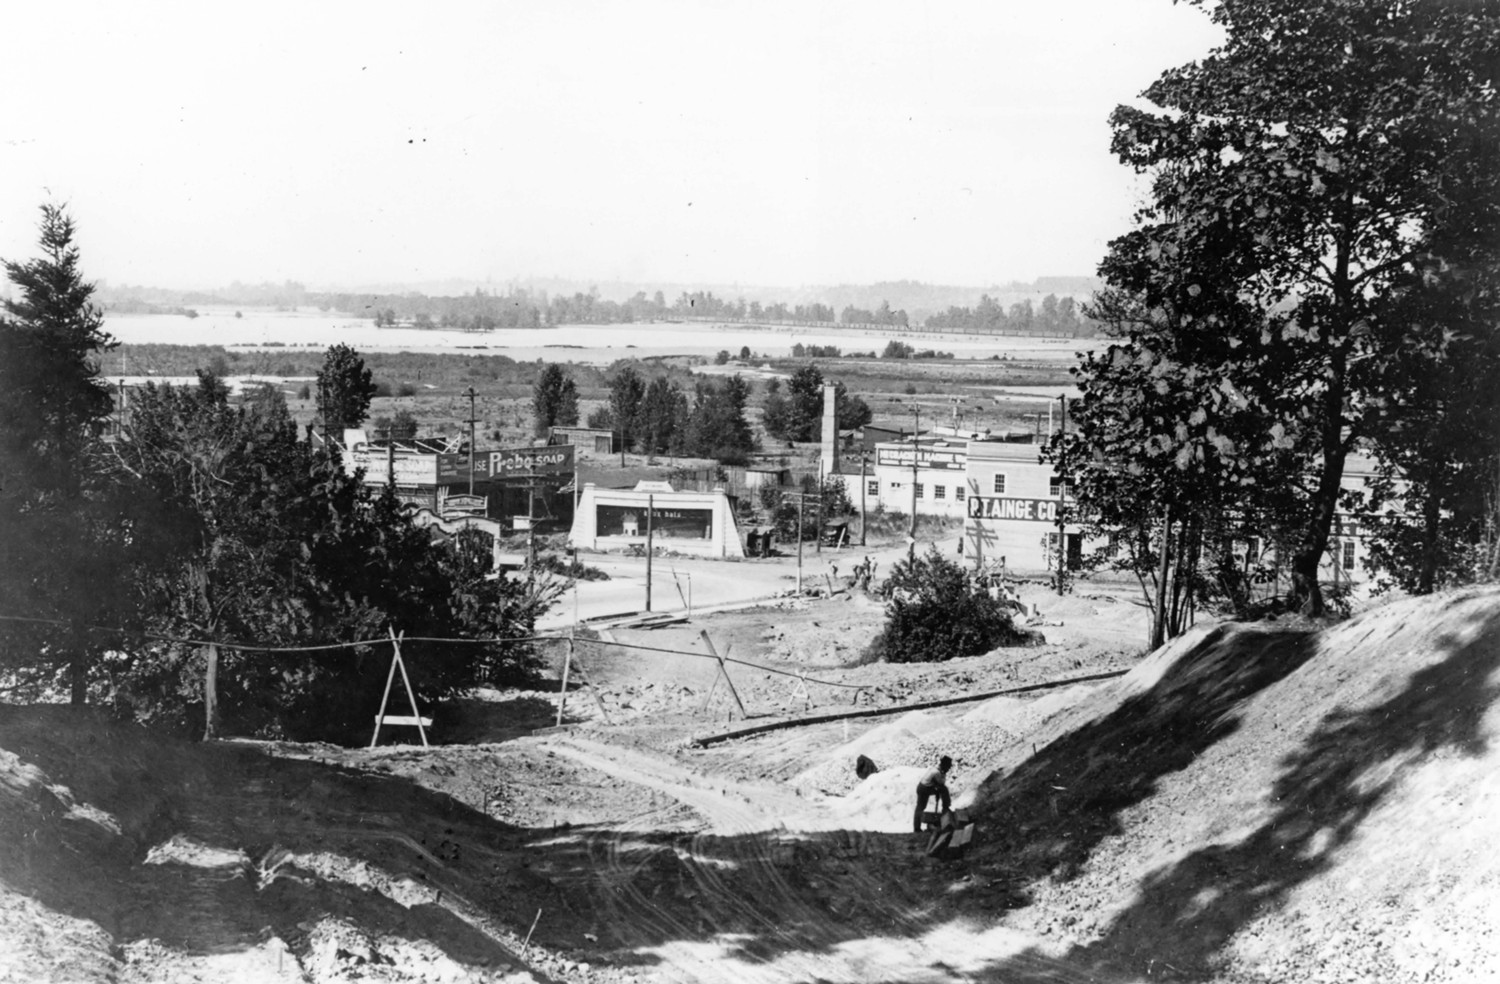 Montgomery Ward & Company Warehouse and Store, Portland Oregon N.W. Wardway road under construction, looking north (1924)